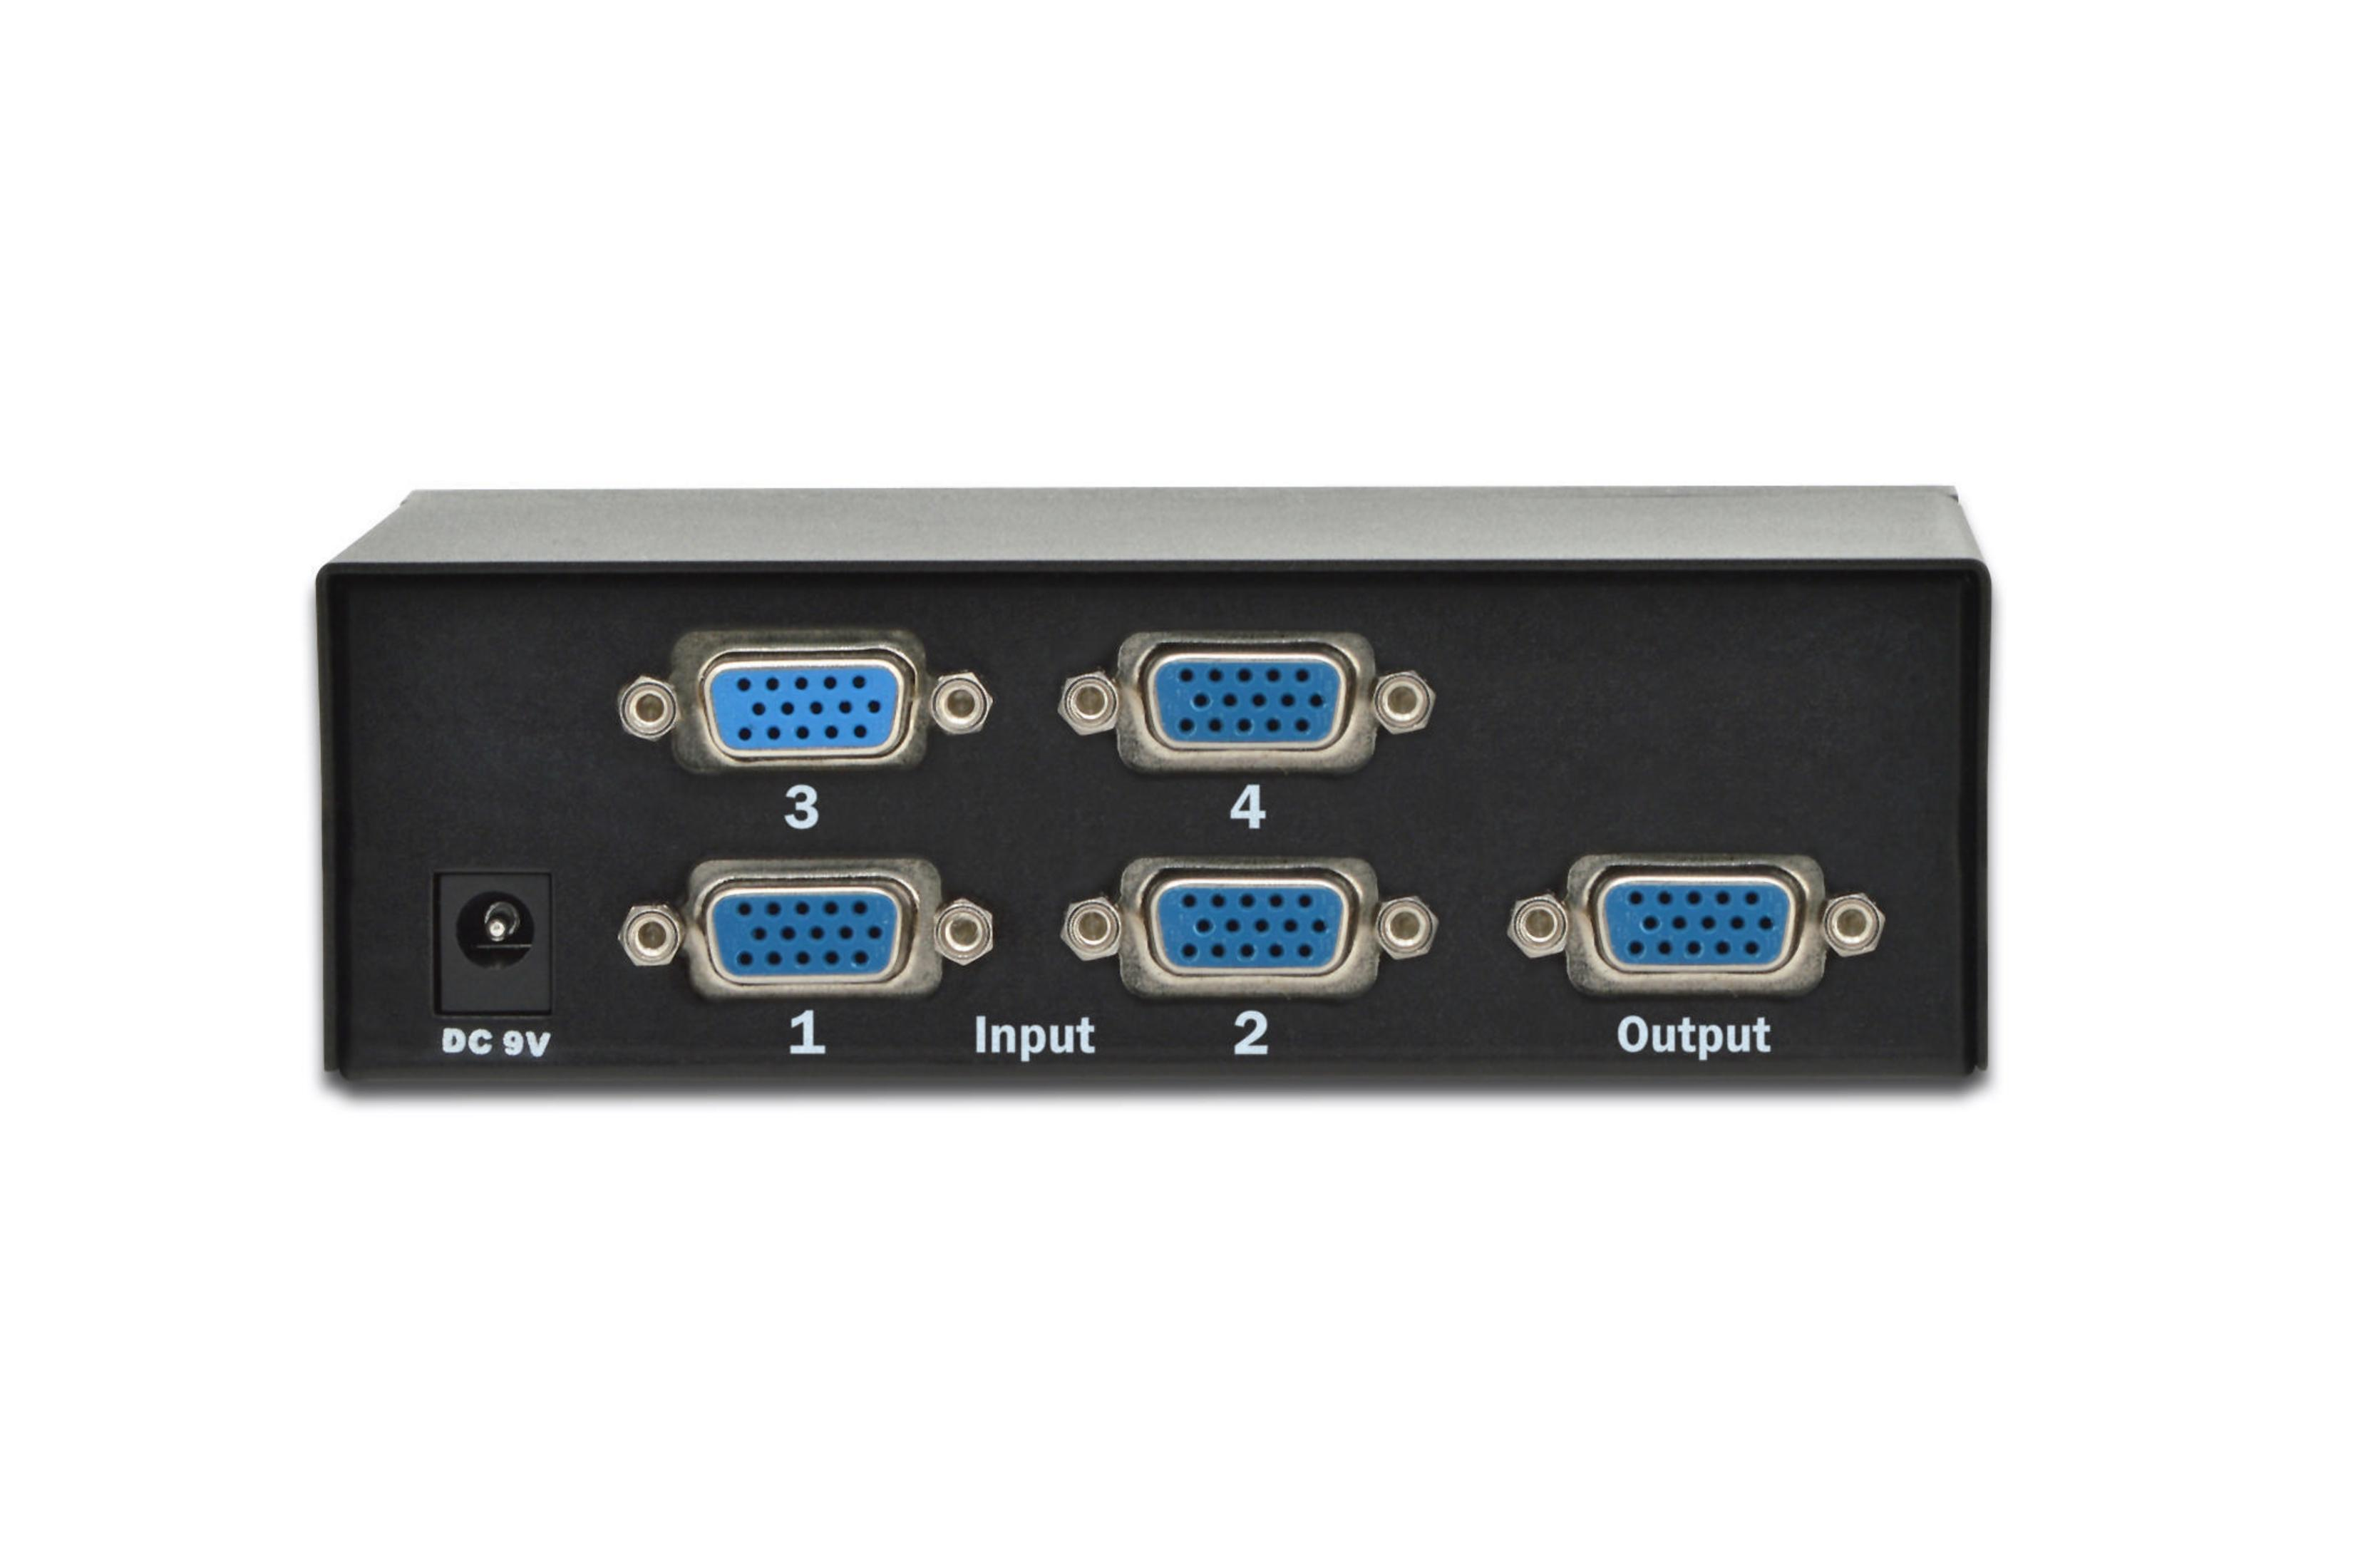 DIGITUS SWITCH INPUTS Switch VGA OUT 4 1 DS-45100-1 VGA